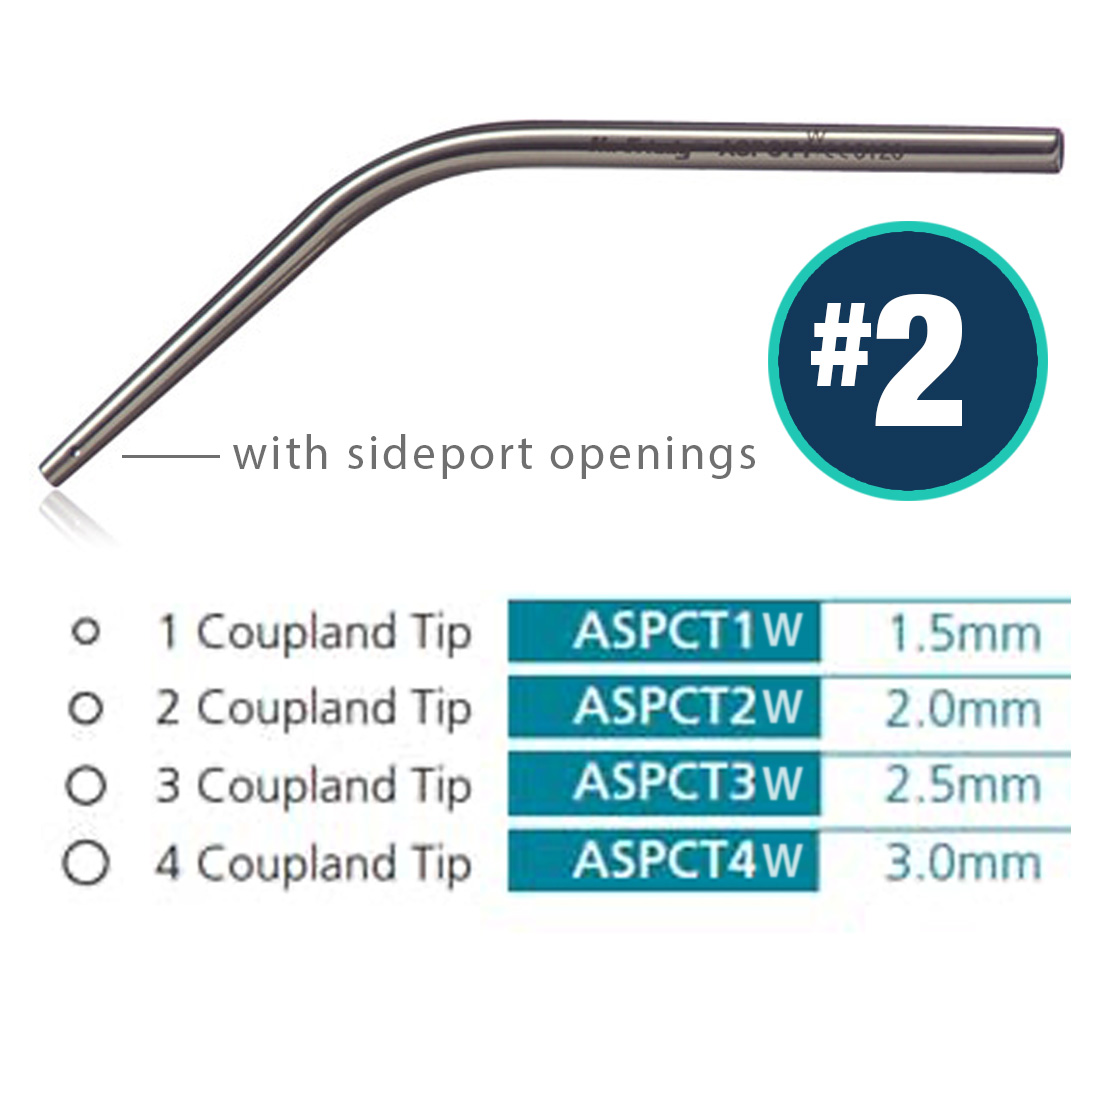 Suction Tip Coupland Size 2 w/ Sideport 2mm Opening 4" 10cm